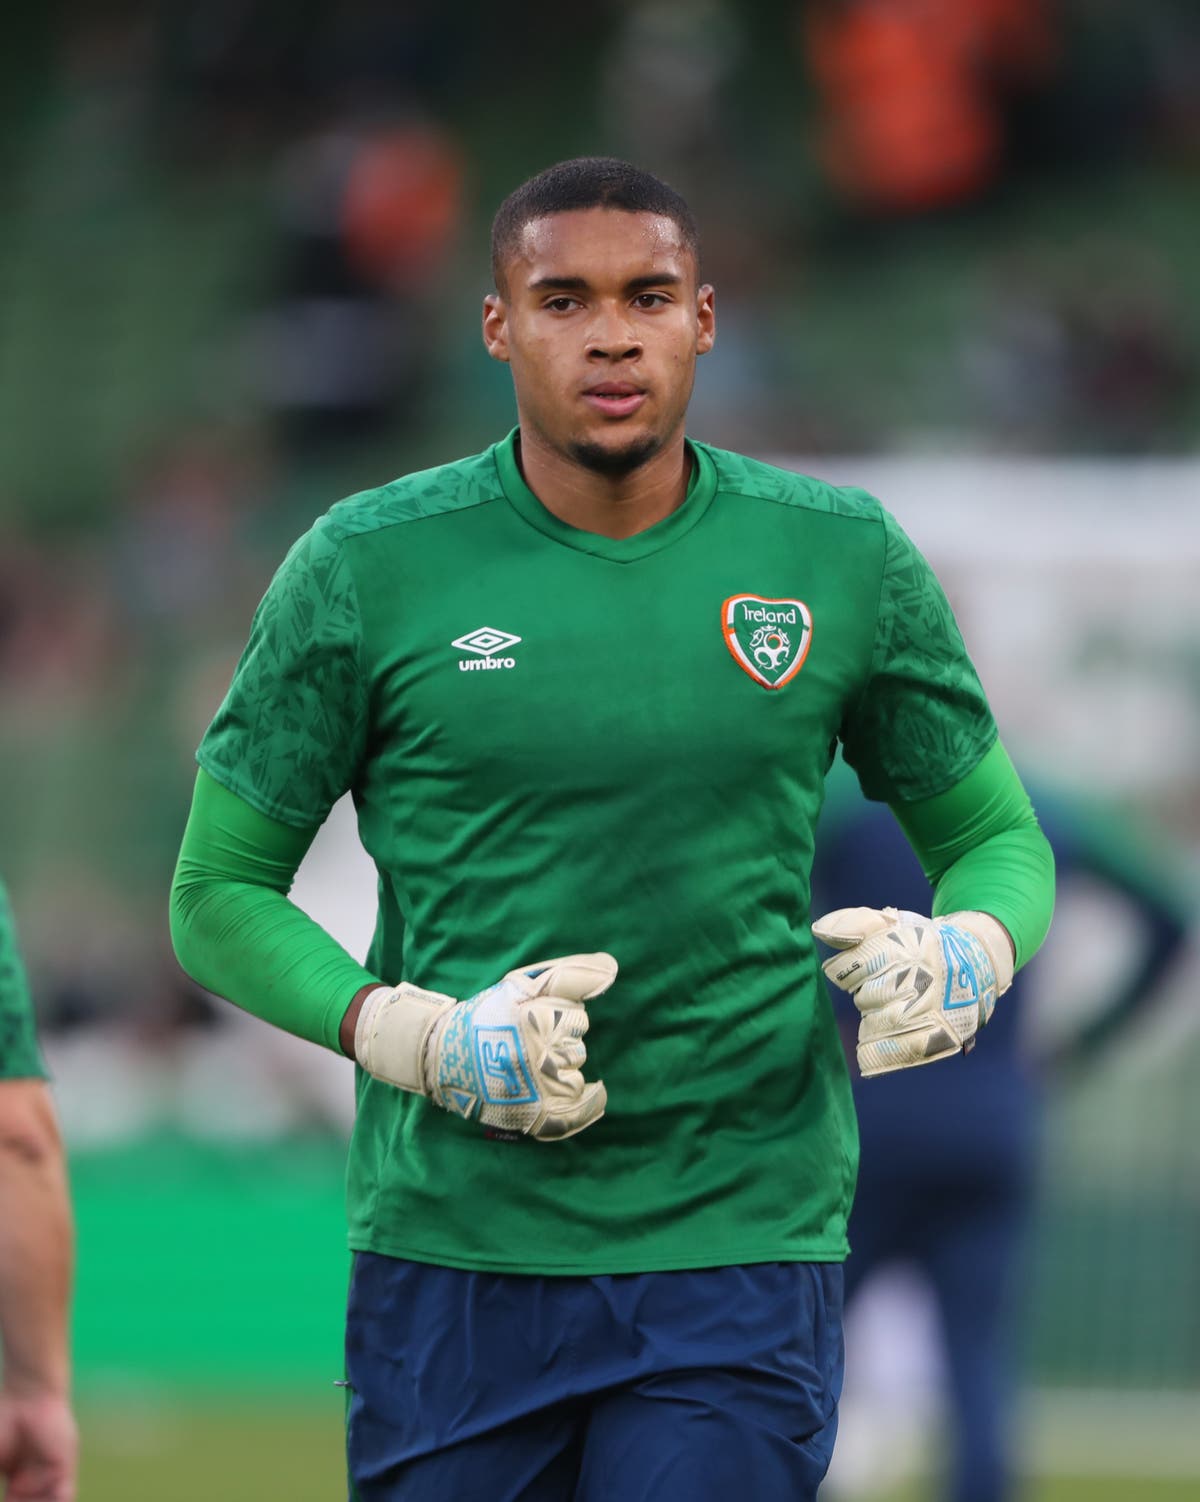 Gavin Baz oh no! Goalkeeper ruled out of Ireland’s upcoming Nations League games